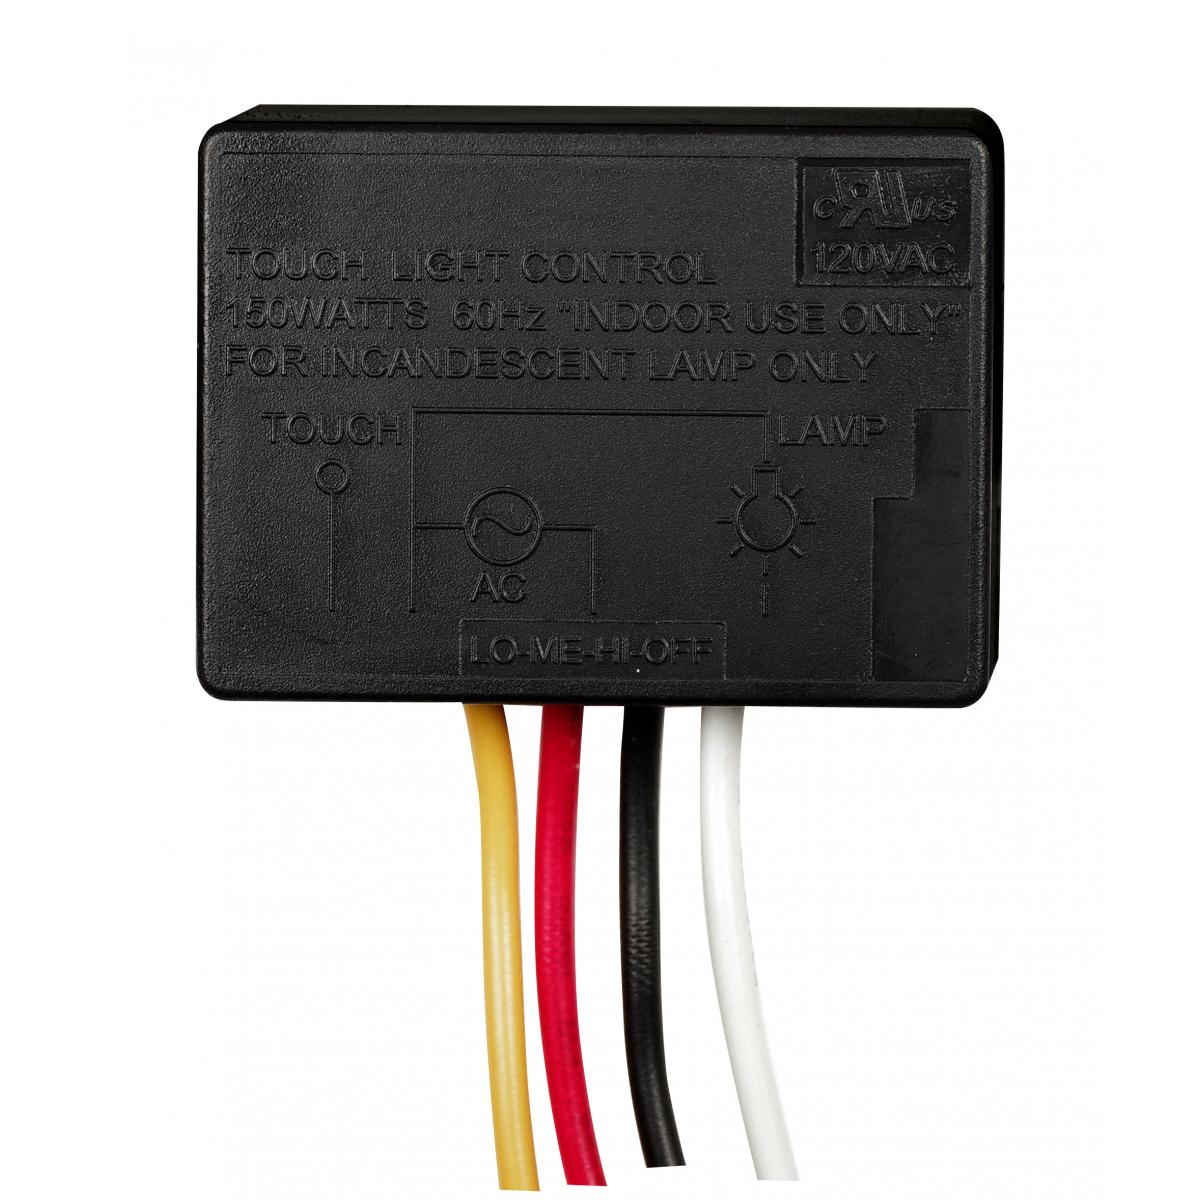 Satco 90-2429 On-Off Touch Switch Plastic Outer Shell. Rated: 150W-120V Indoor Incandescent Use Only 17/8" x 13/8" x 5/8"